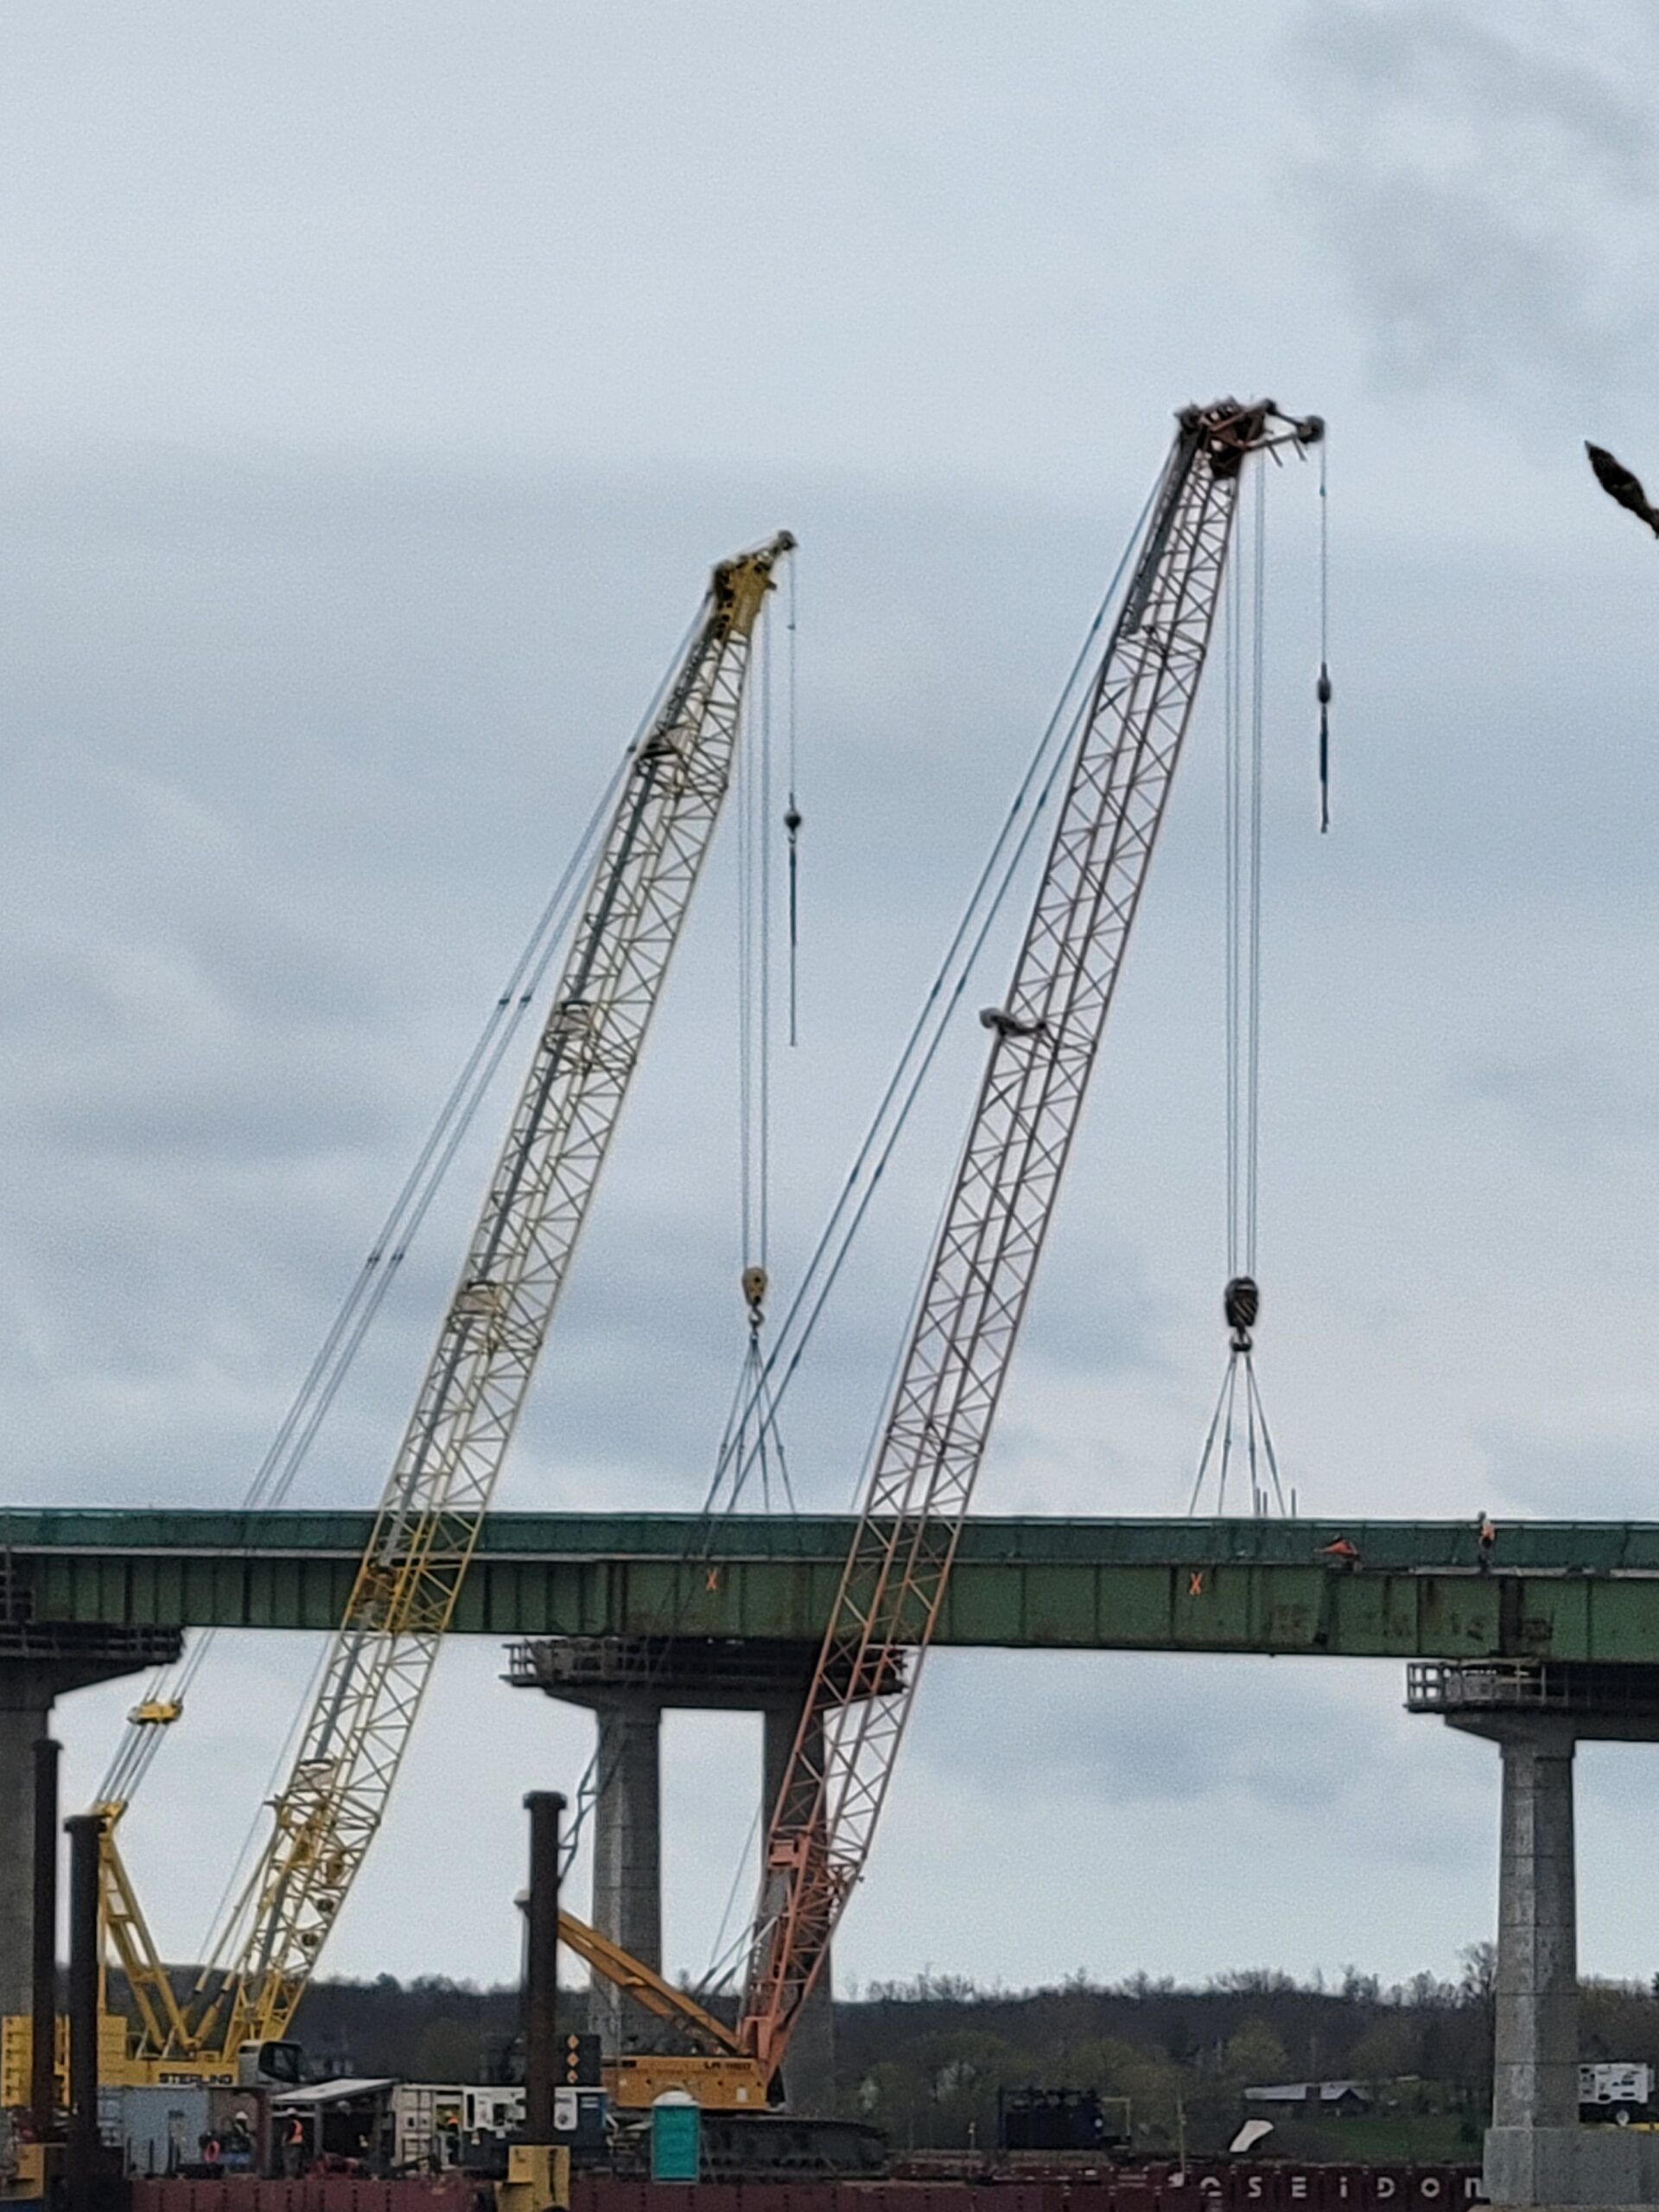 Both 200-ton cranes hooked-up to the third girder section for removal